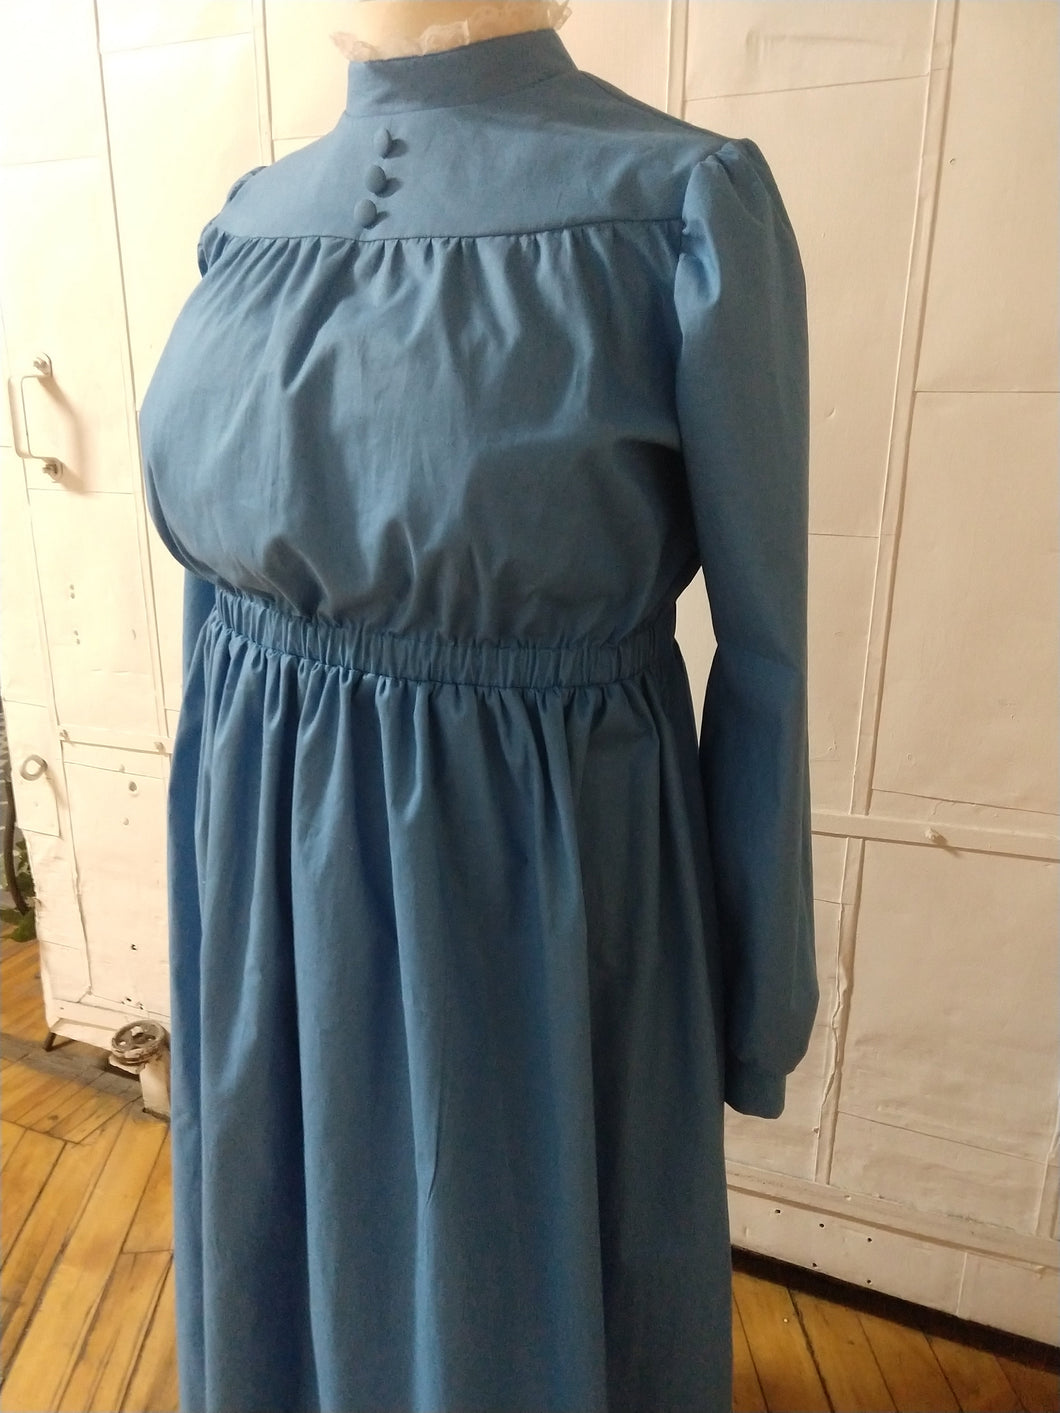 Sophie dress from Howl's Moving Castle